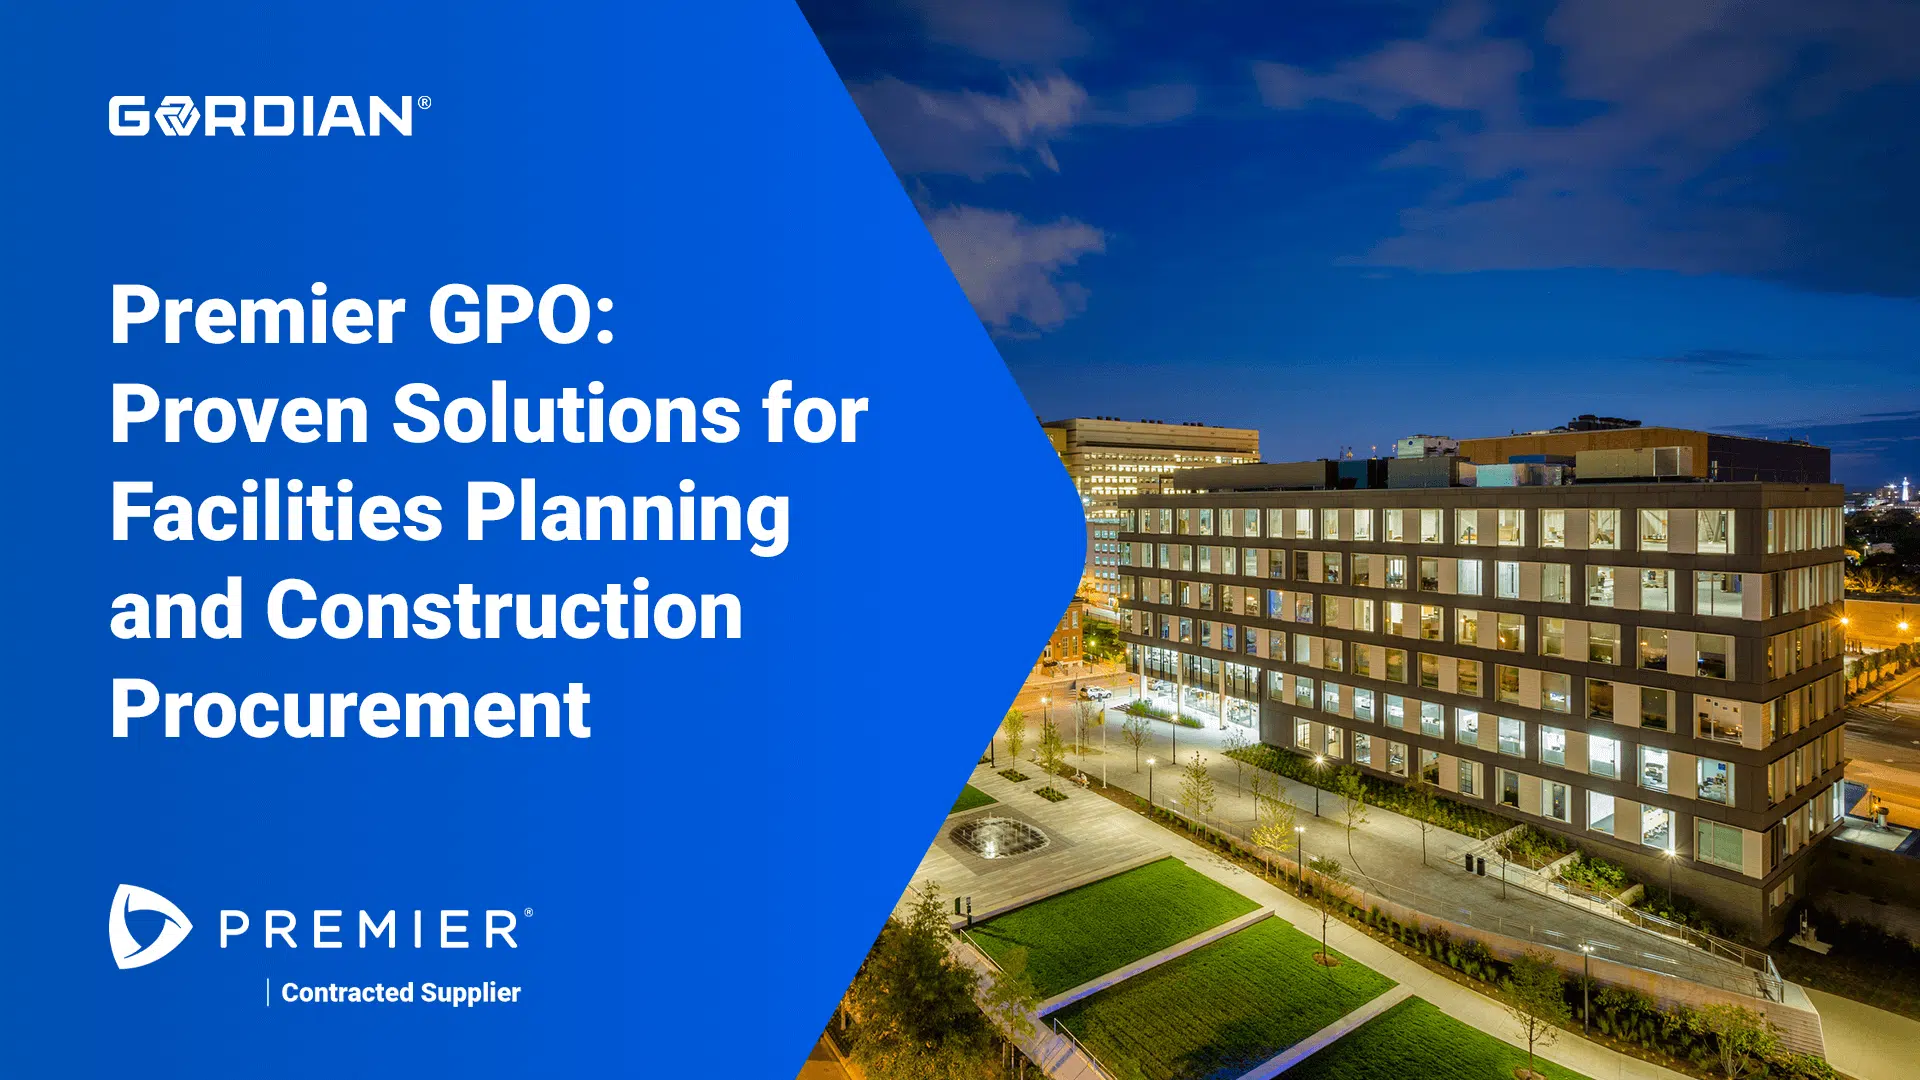 Premier GPO and Gordian: Proven Solutions for Facilities Planning and Construction Procurement 2